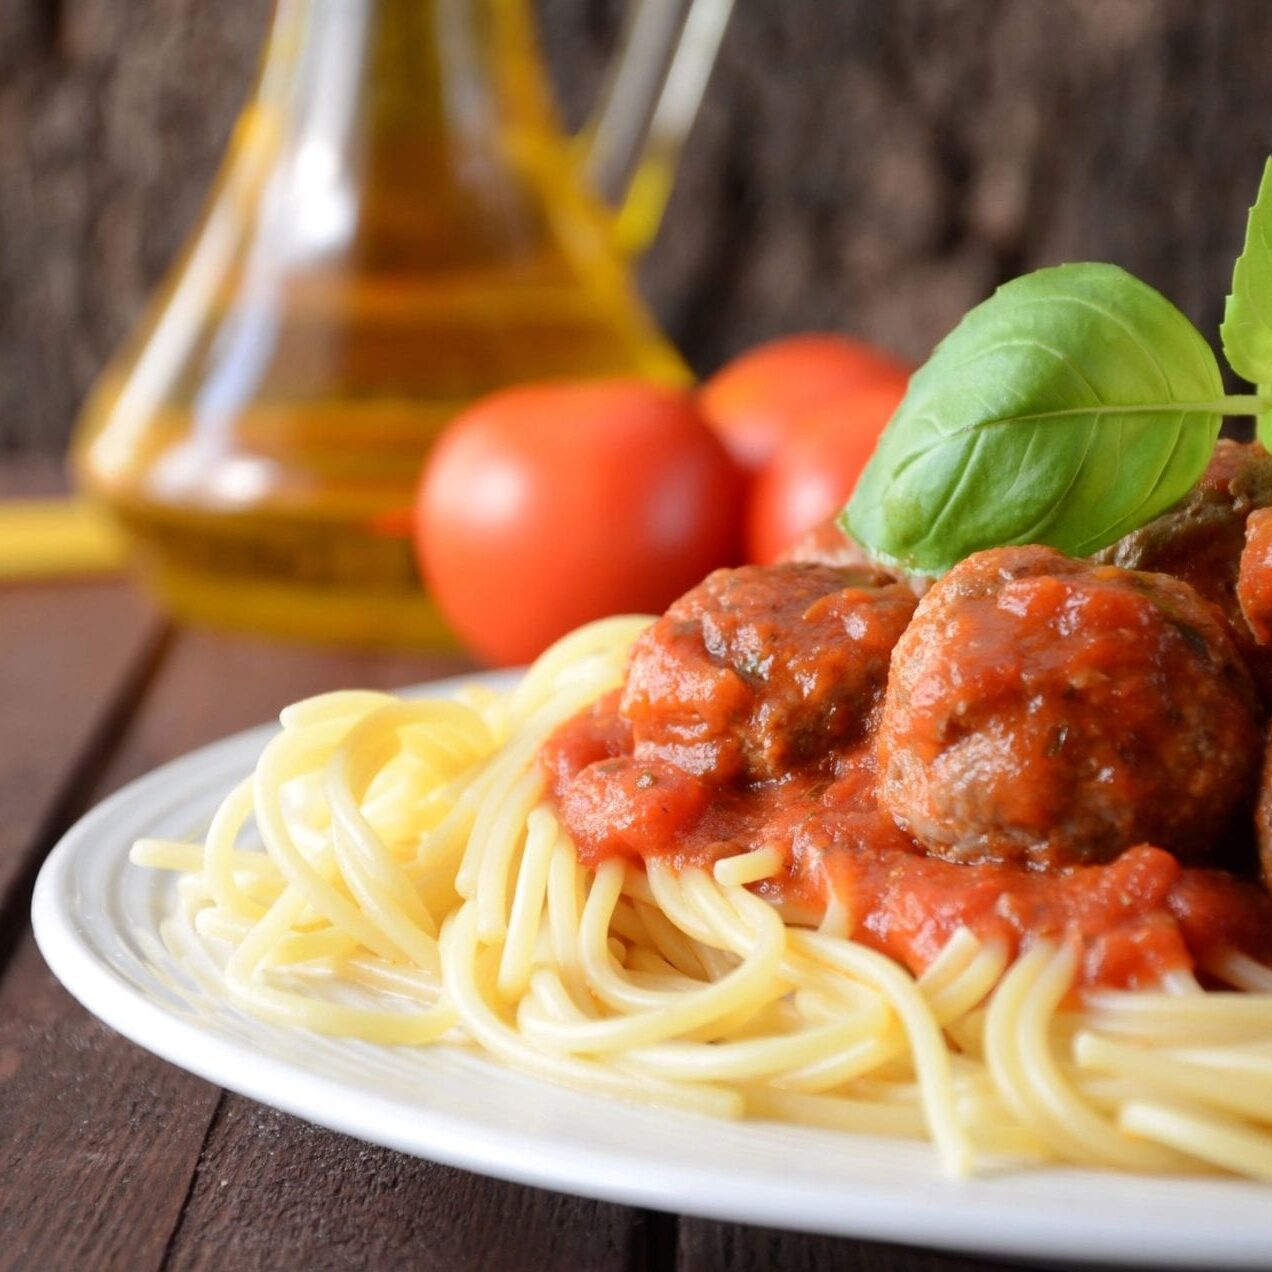 A plate of spaghetti and meatballs on top of a table.